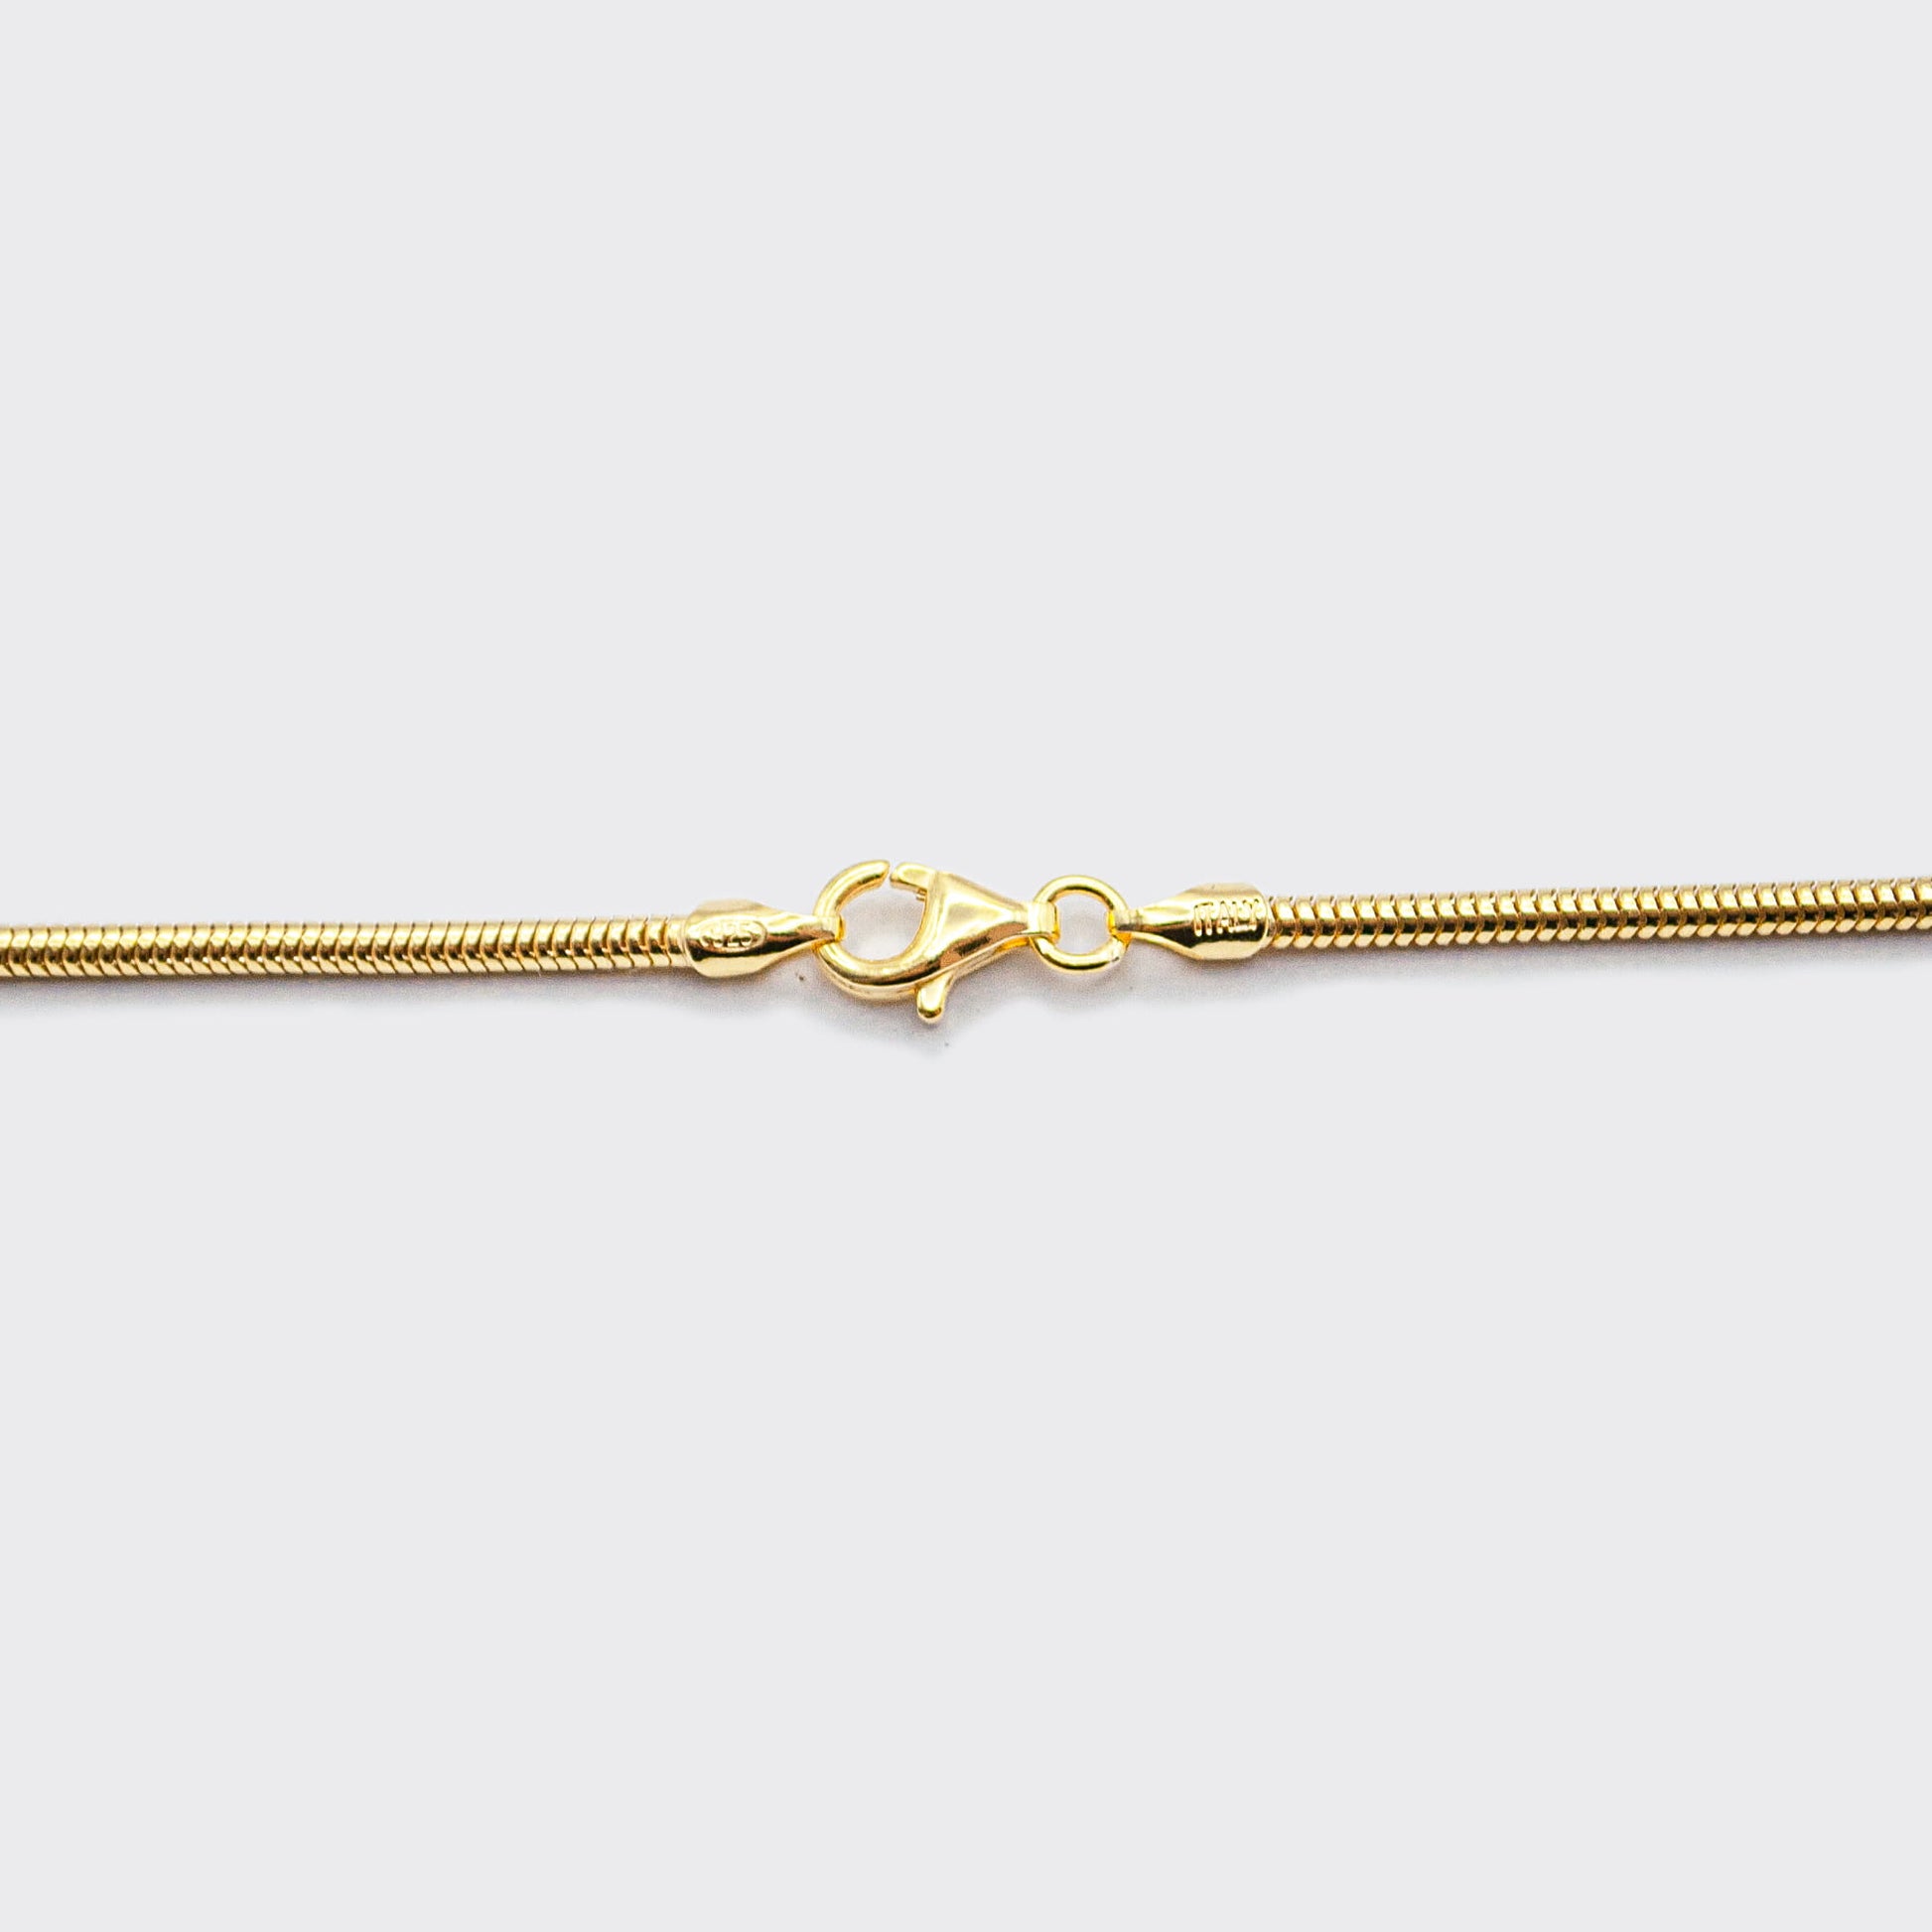 The Mamba necklace is made of 925 sterling silver, covered with 18K gold. The chain is handcrafted in Italy and made for both men and women.